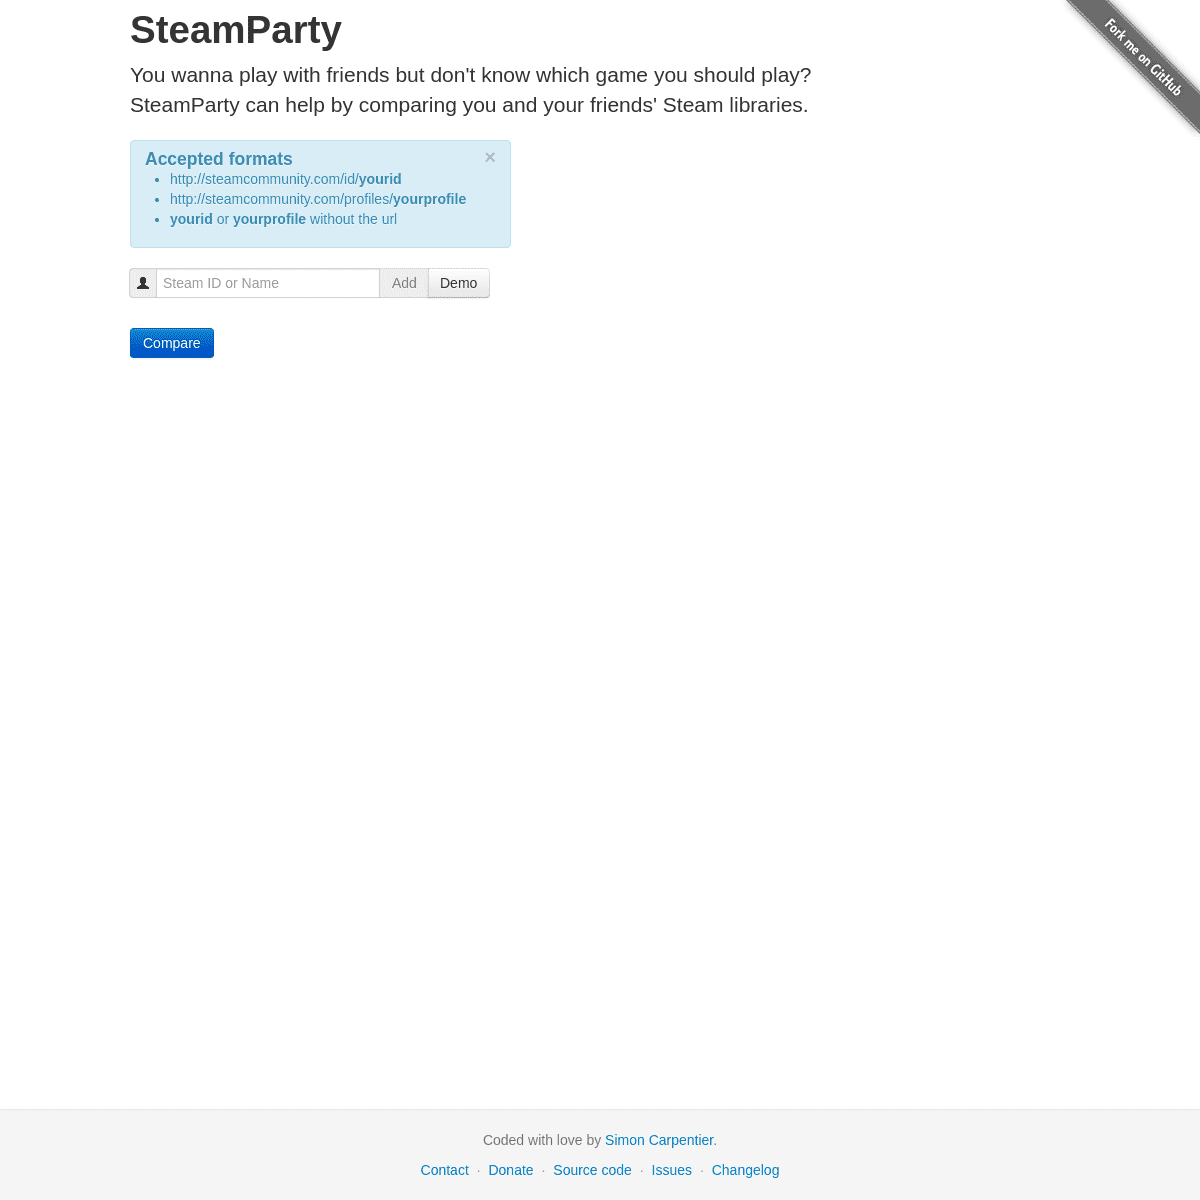 A complete backup of steamparty.azurewebsites.net